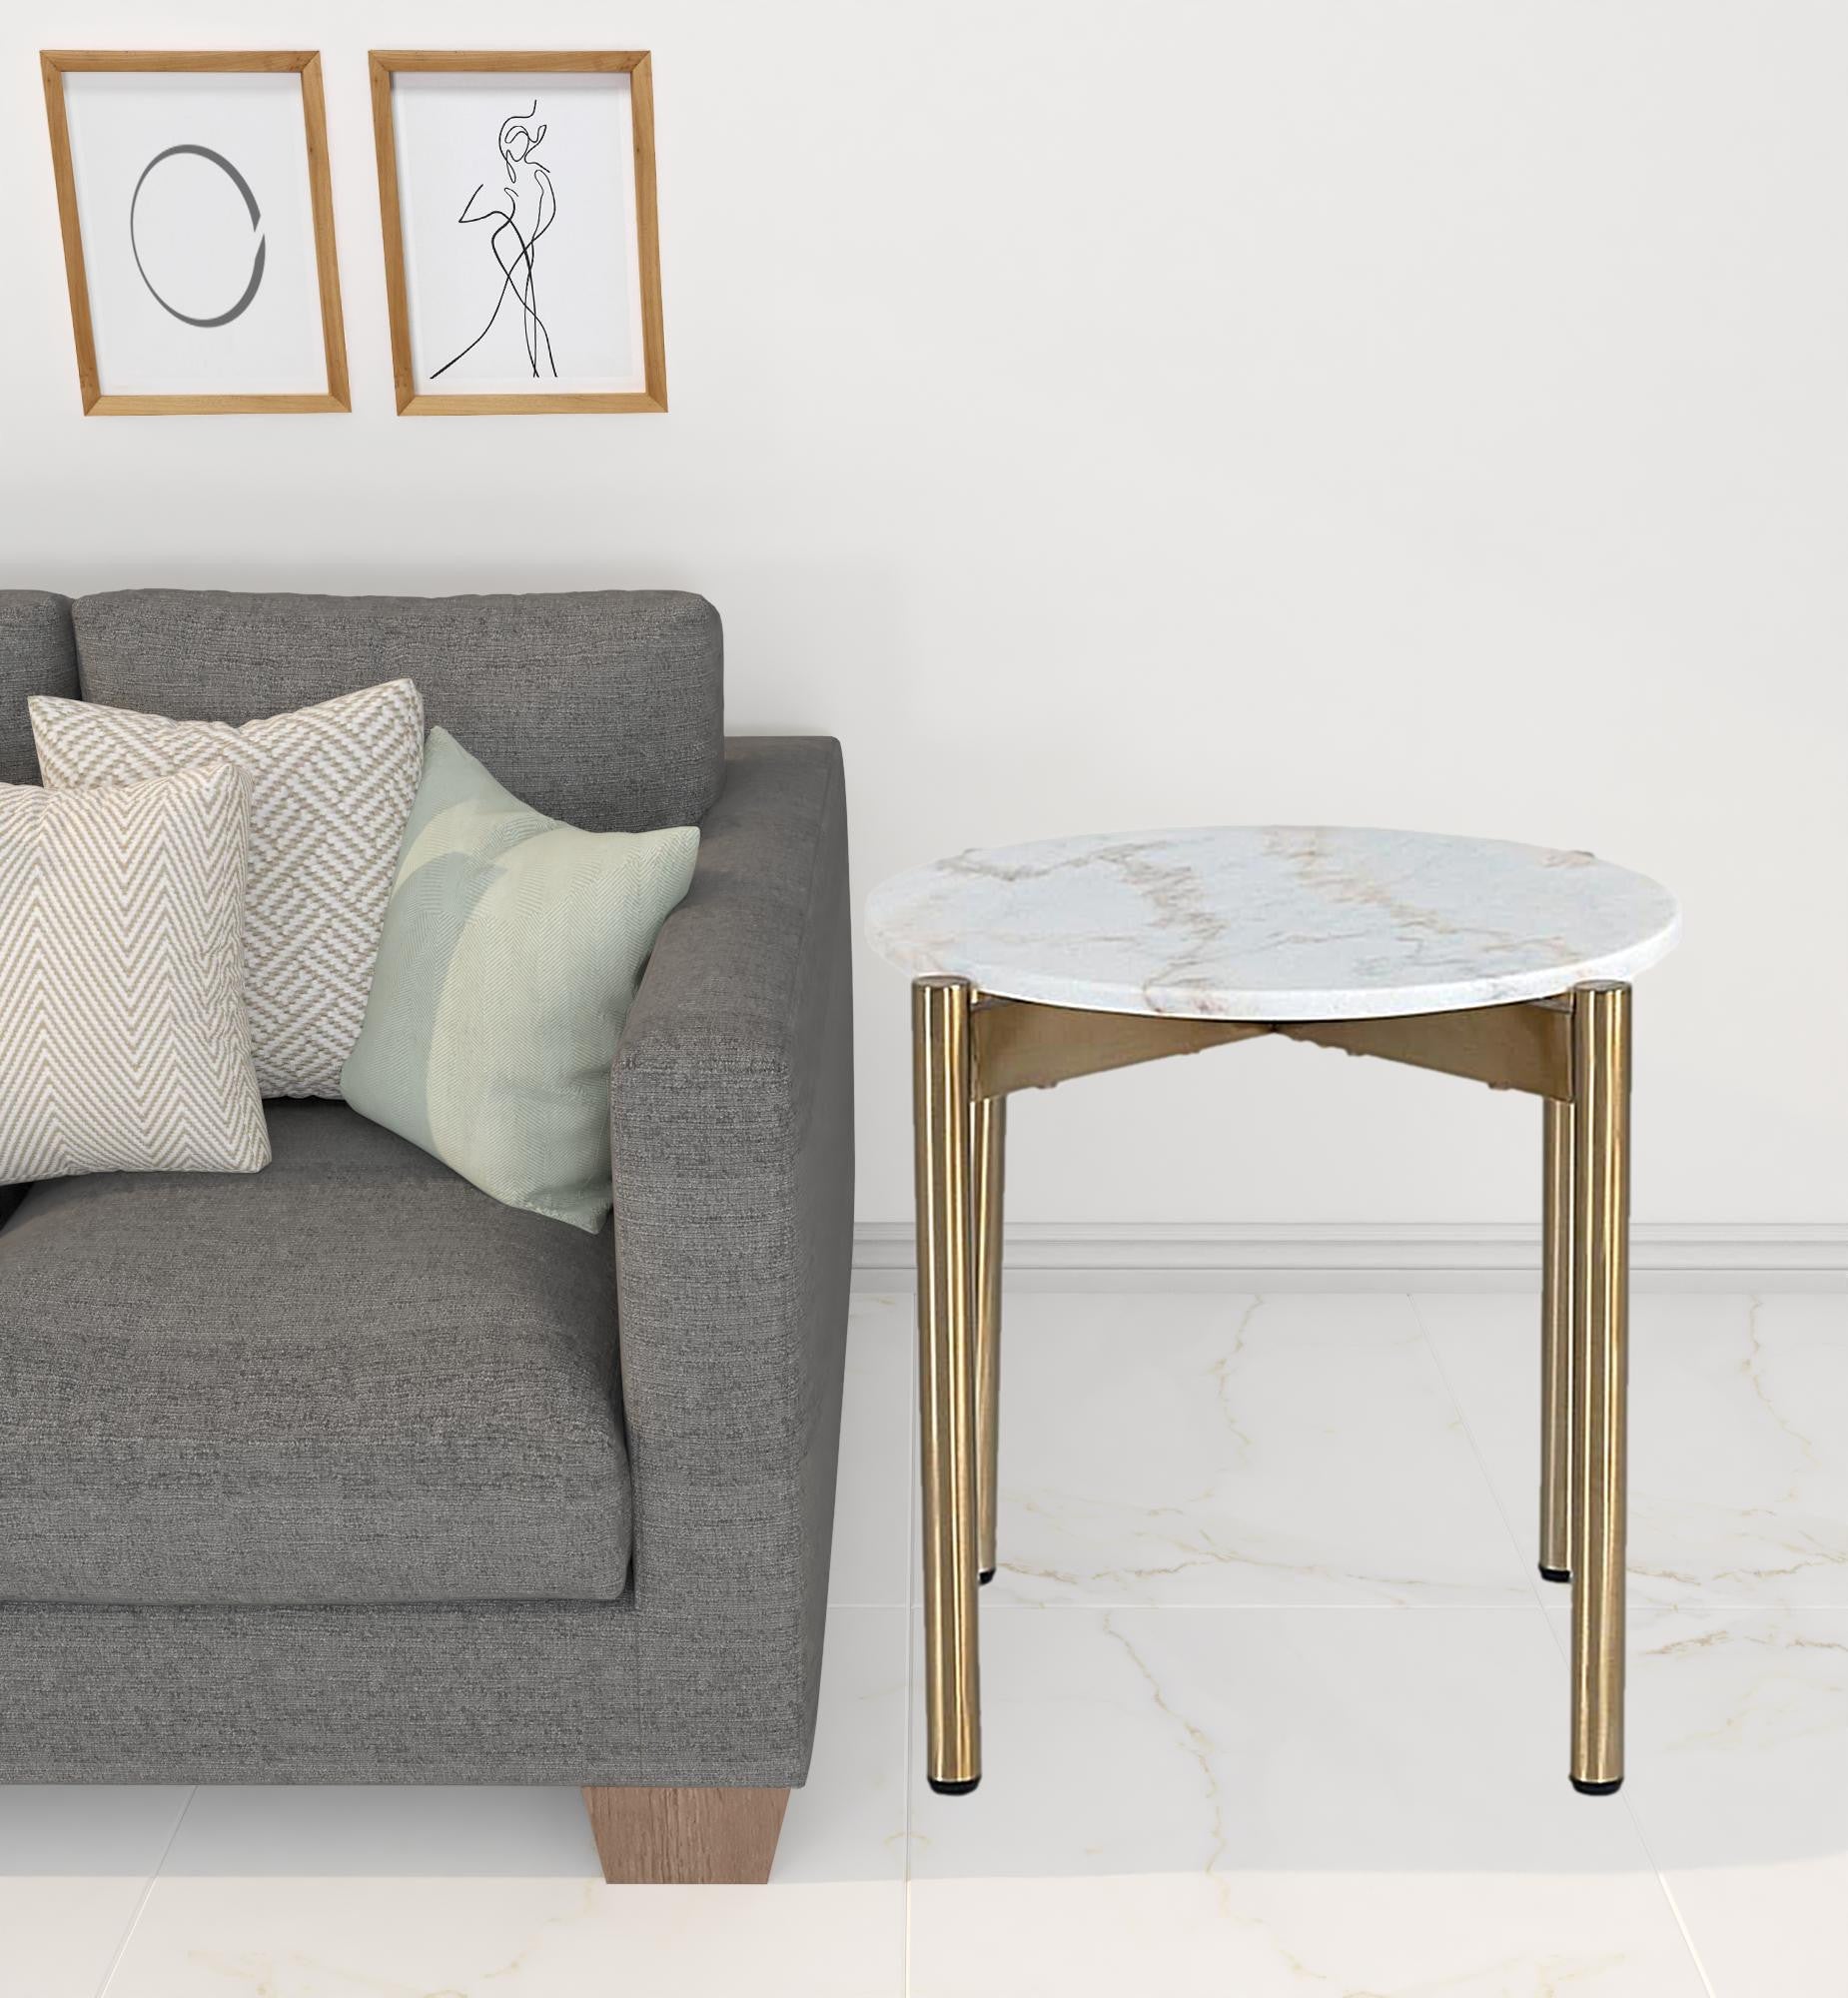 22" Gold And White Marble Round End Table